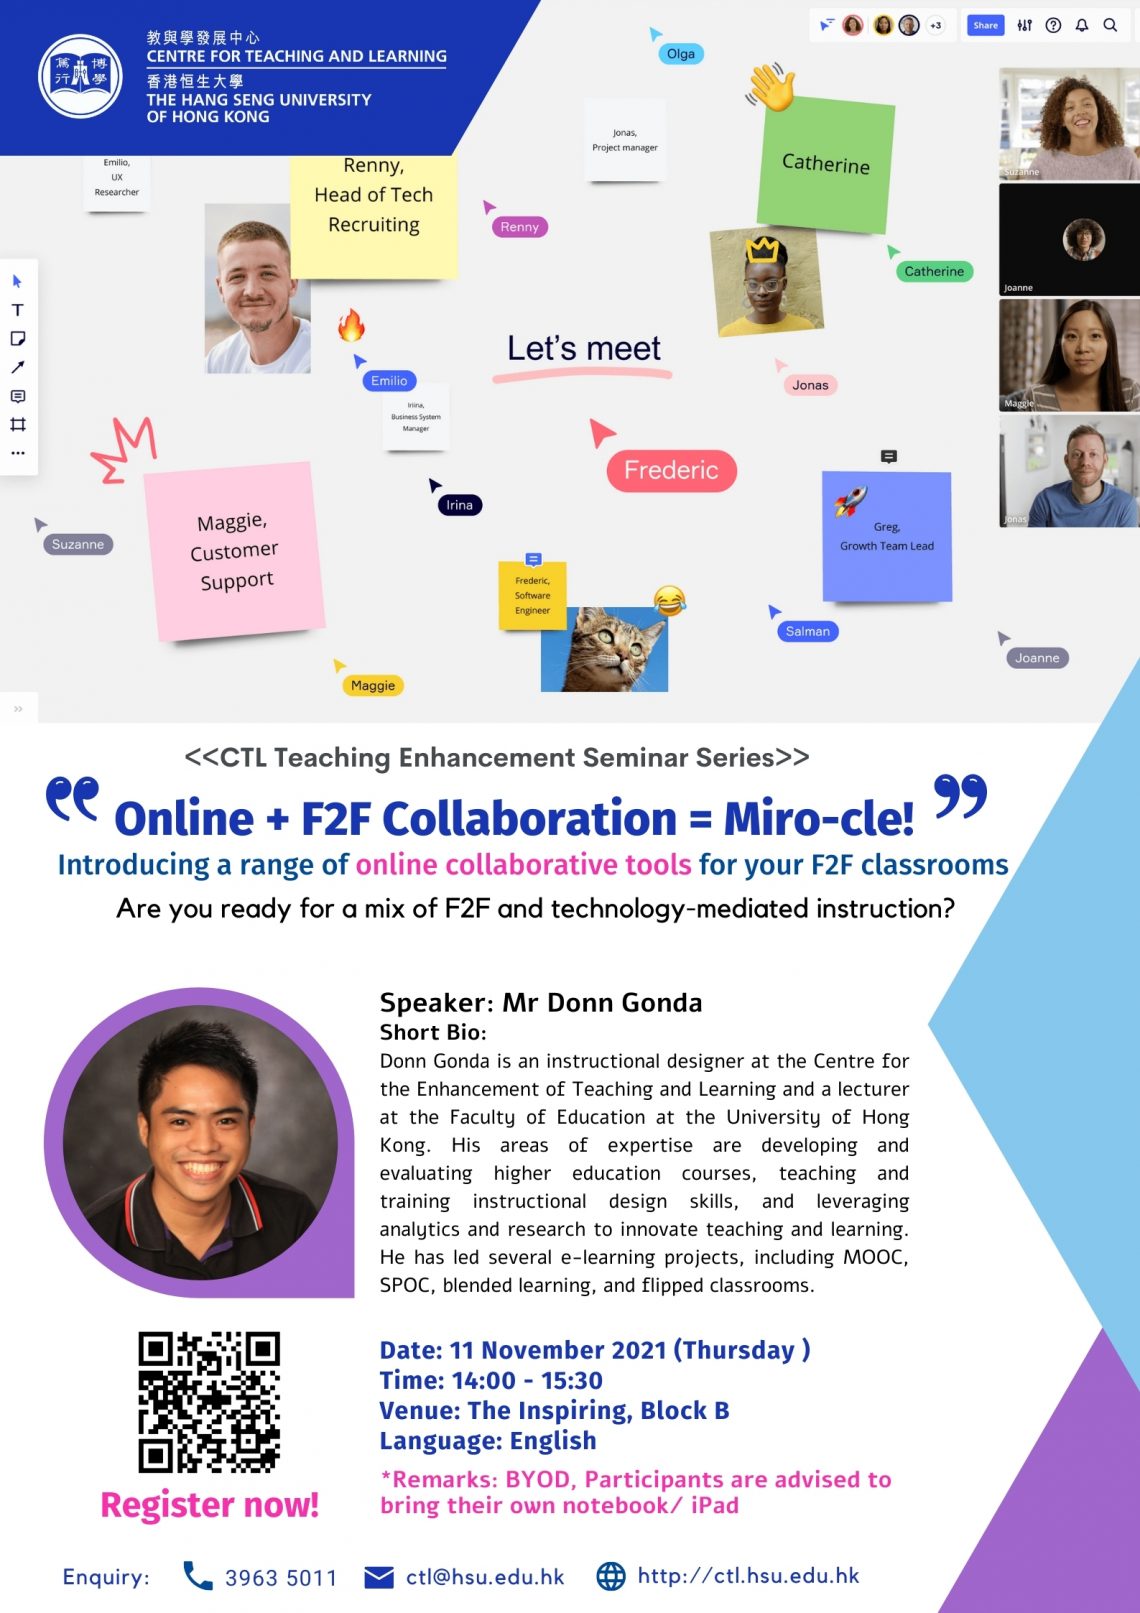 CTL Online + F2F Collaboration = Miro-cle! Introducing a range of online collaborative tools for your F2F classrooms